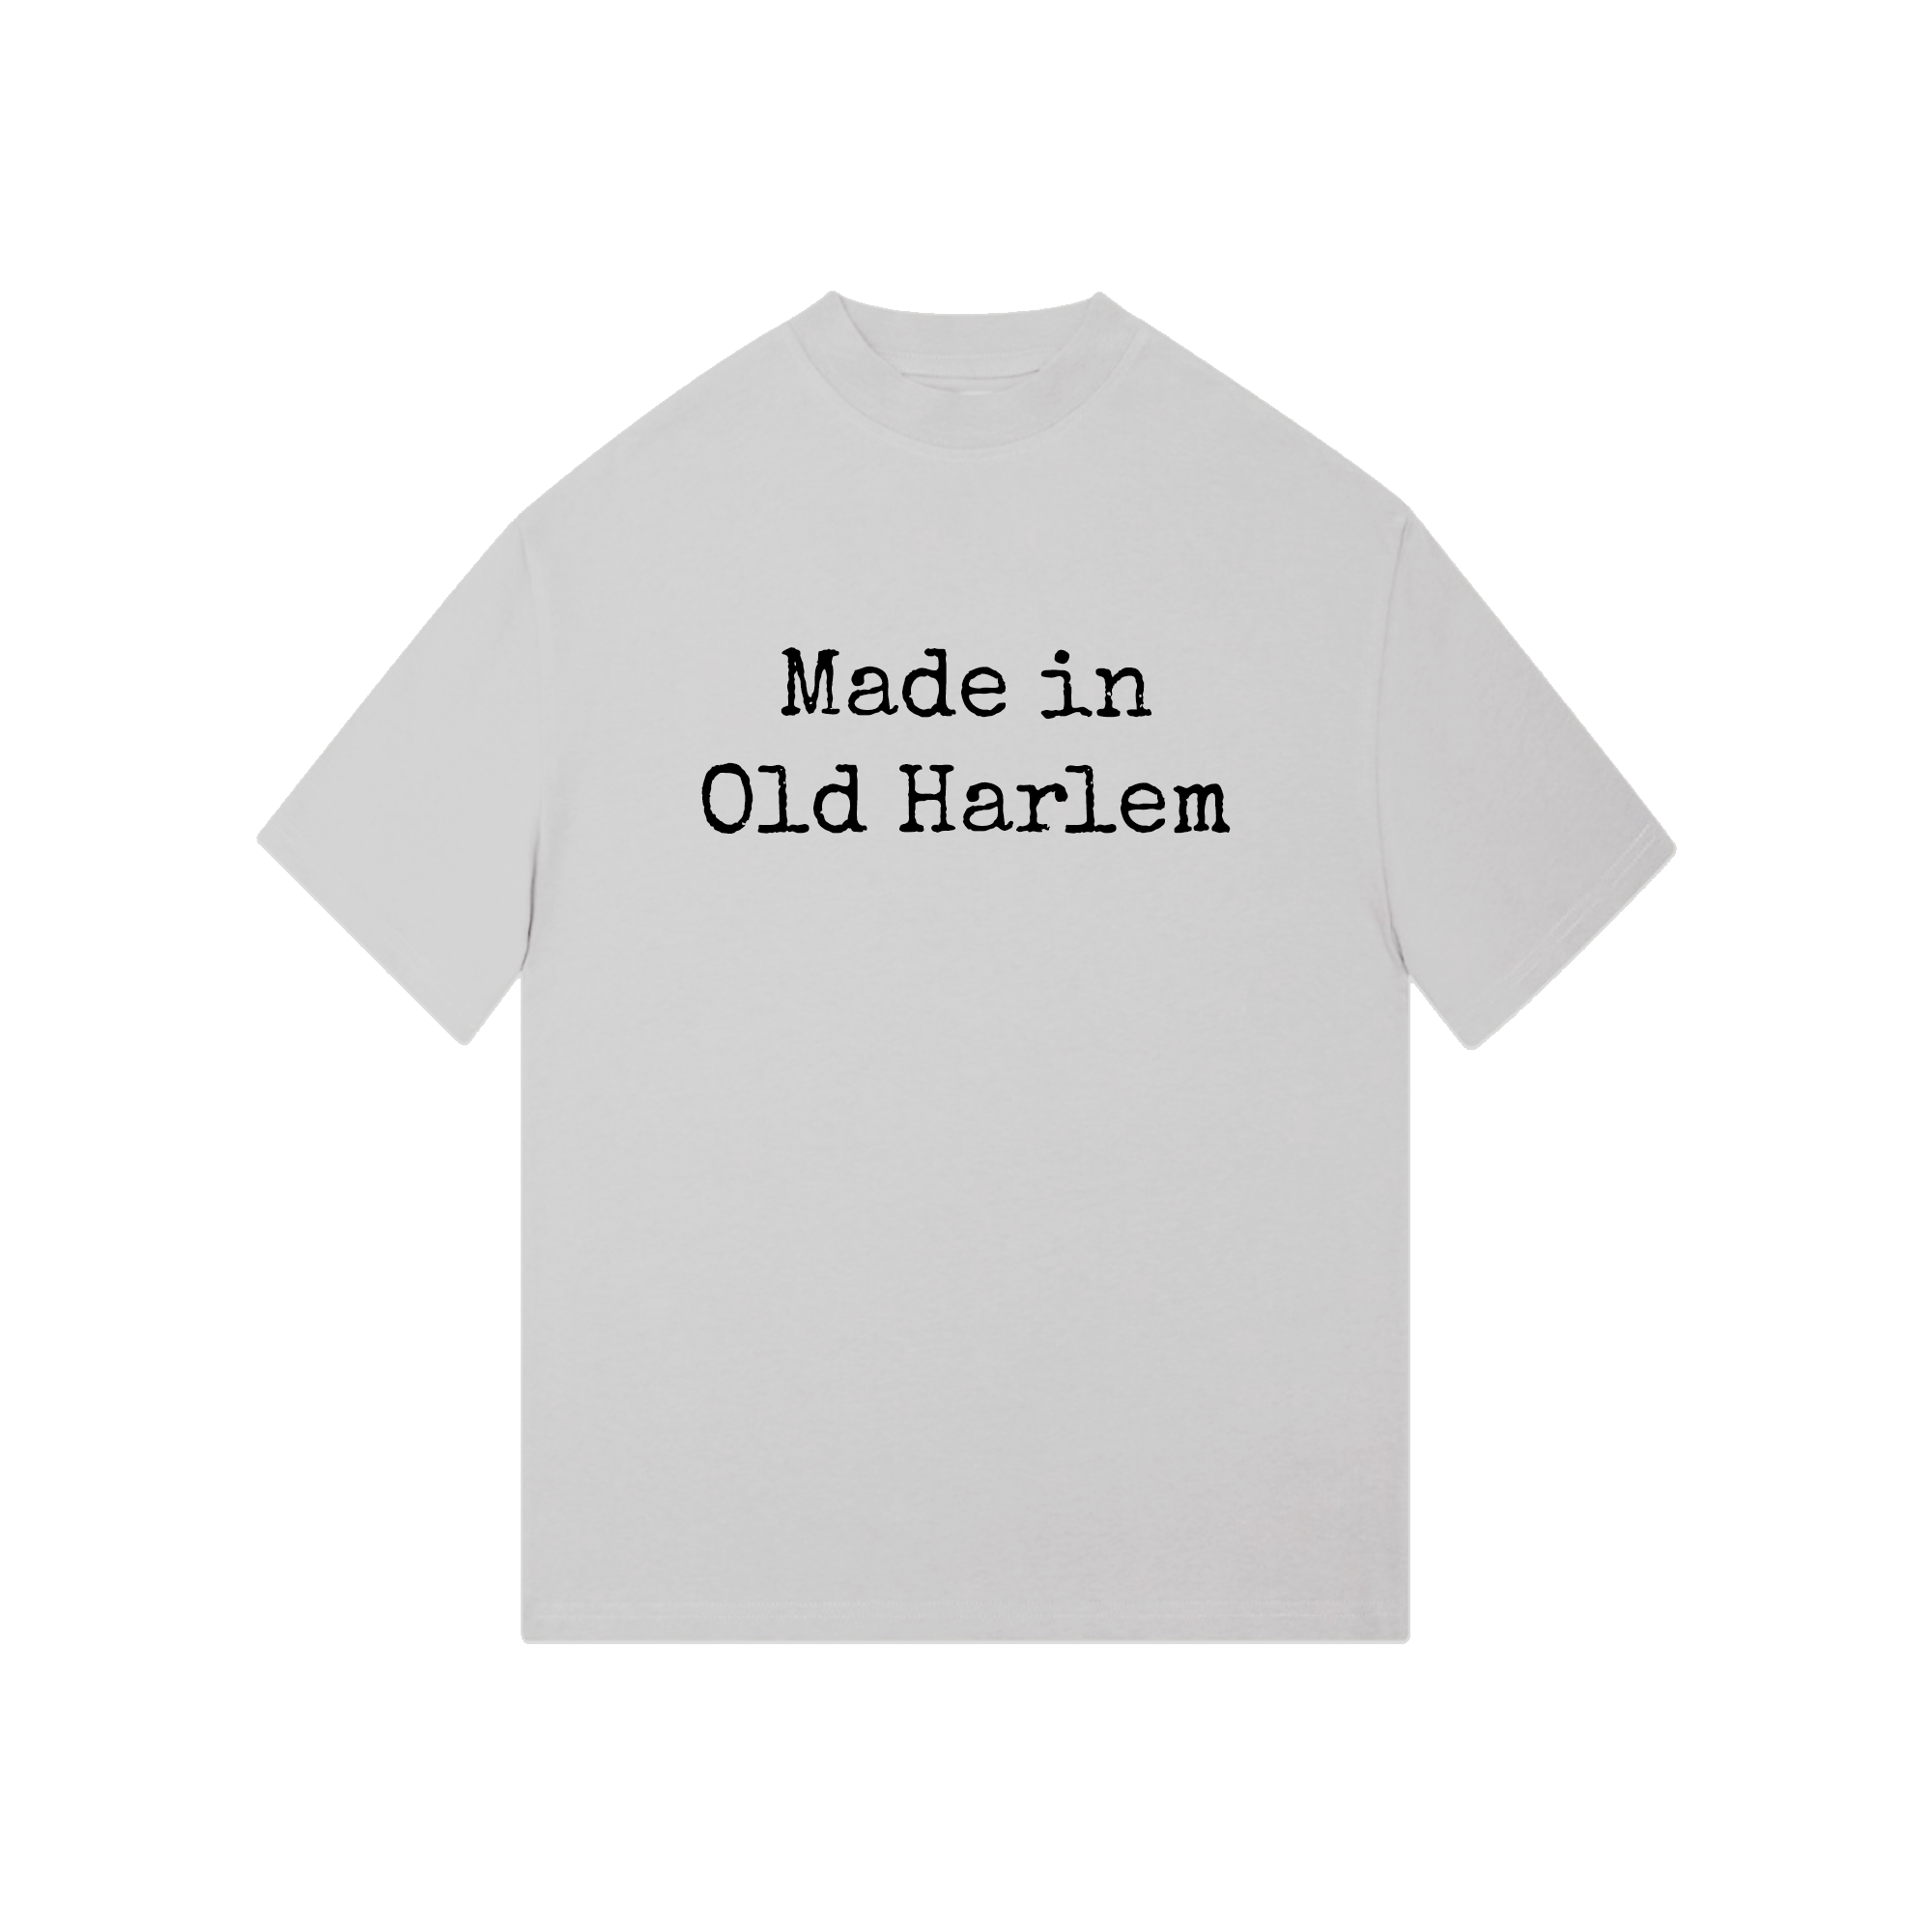 Made in Old Harlem T-Shirt